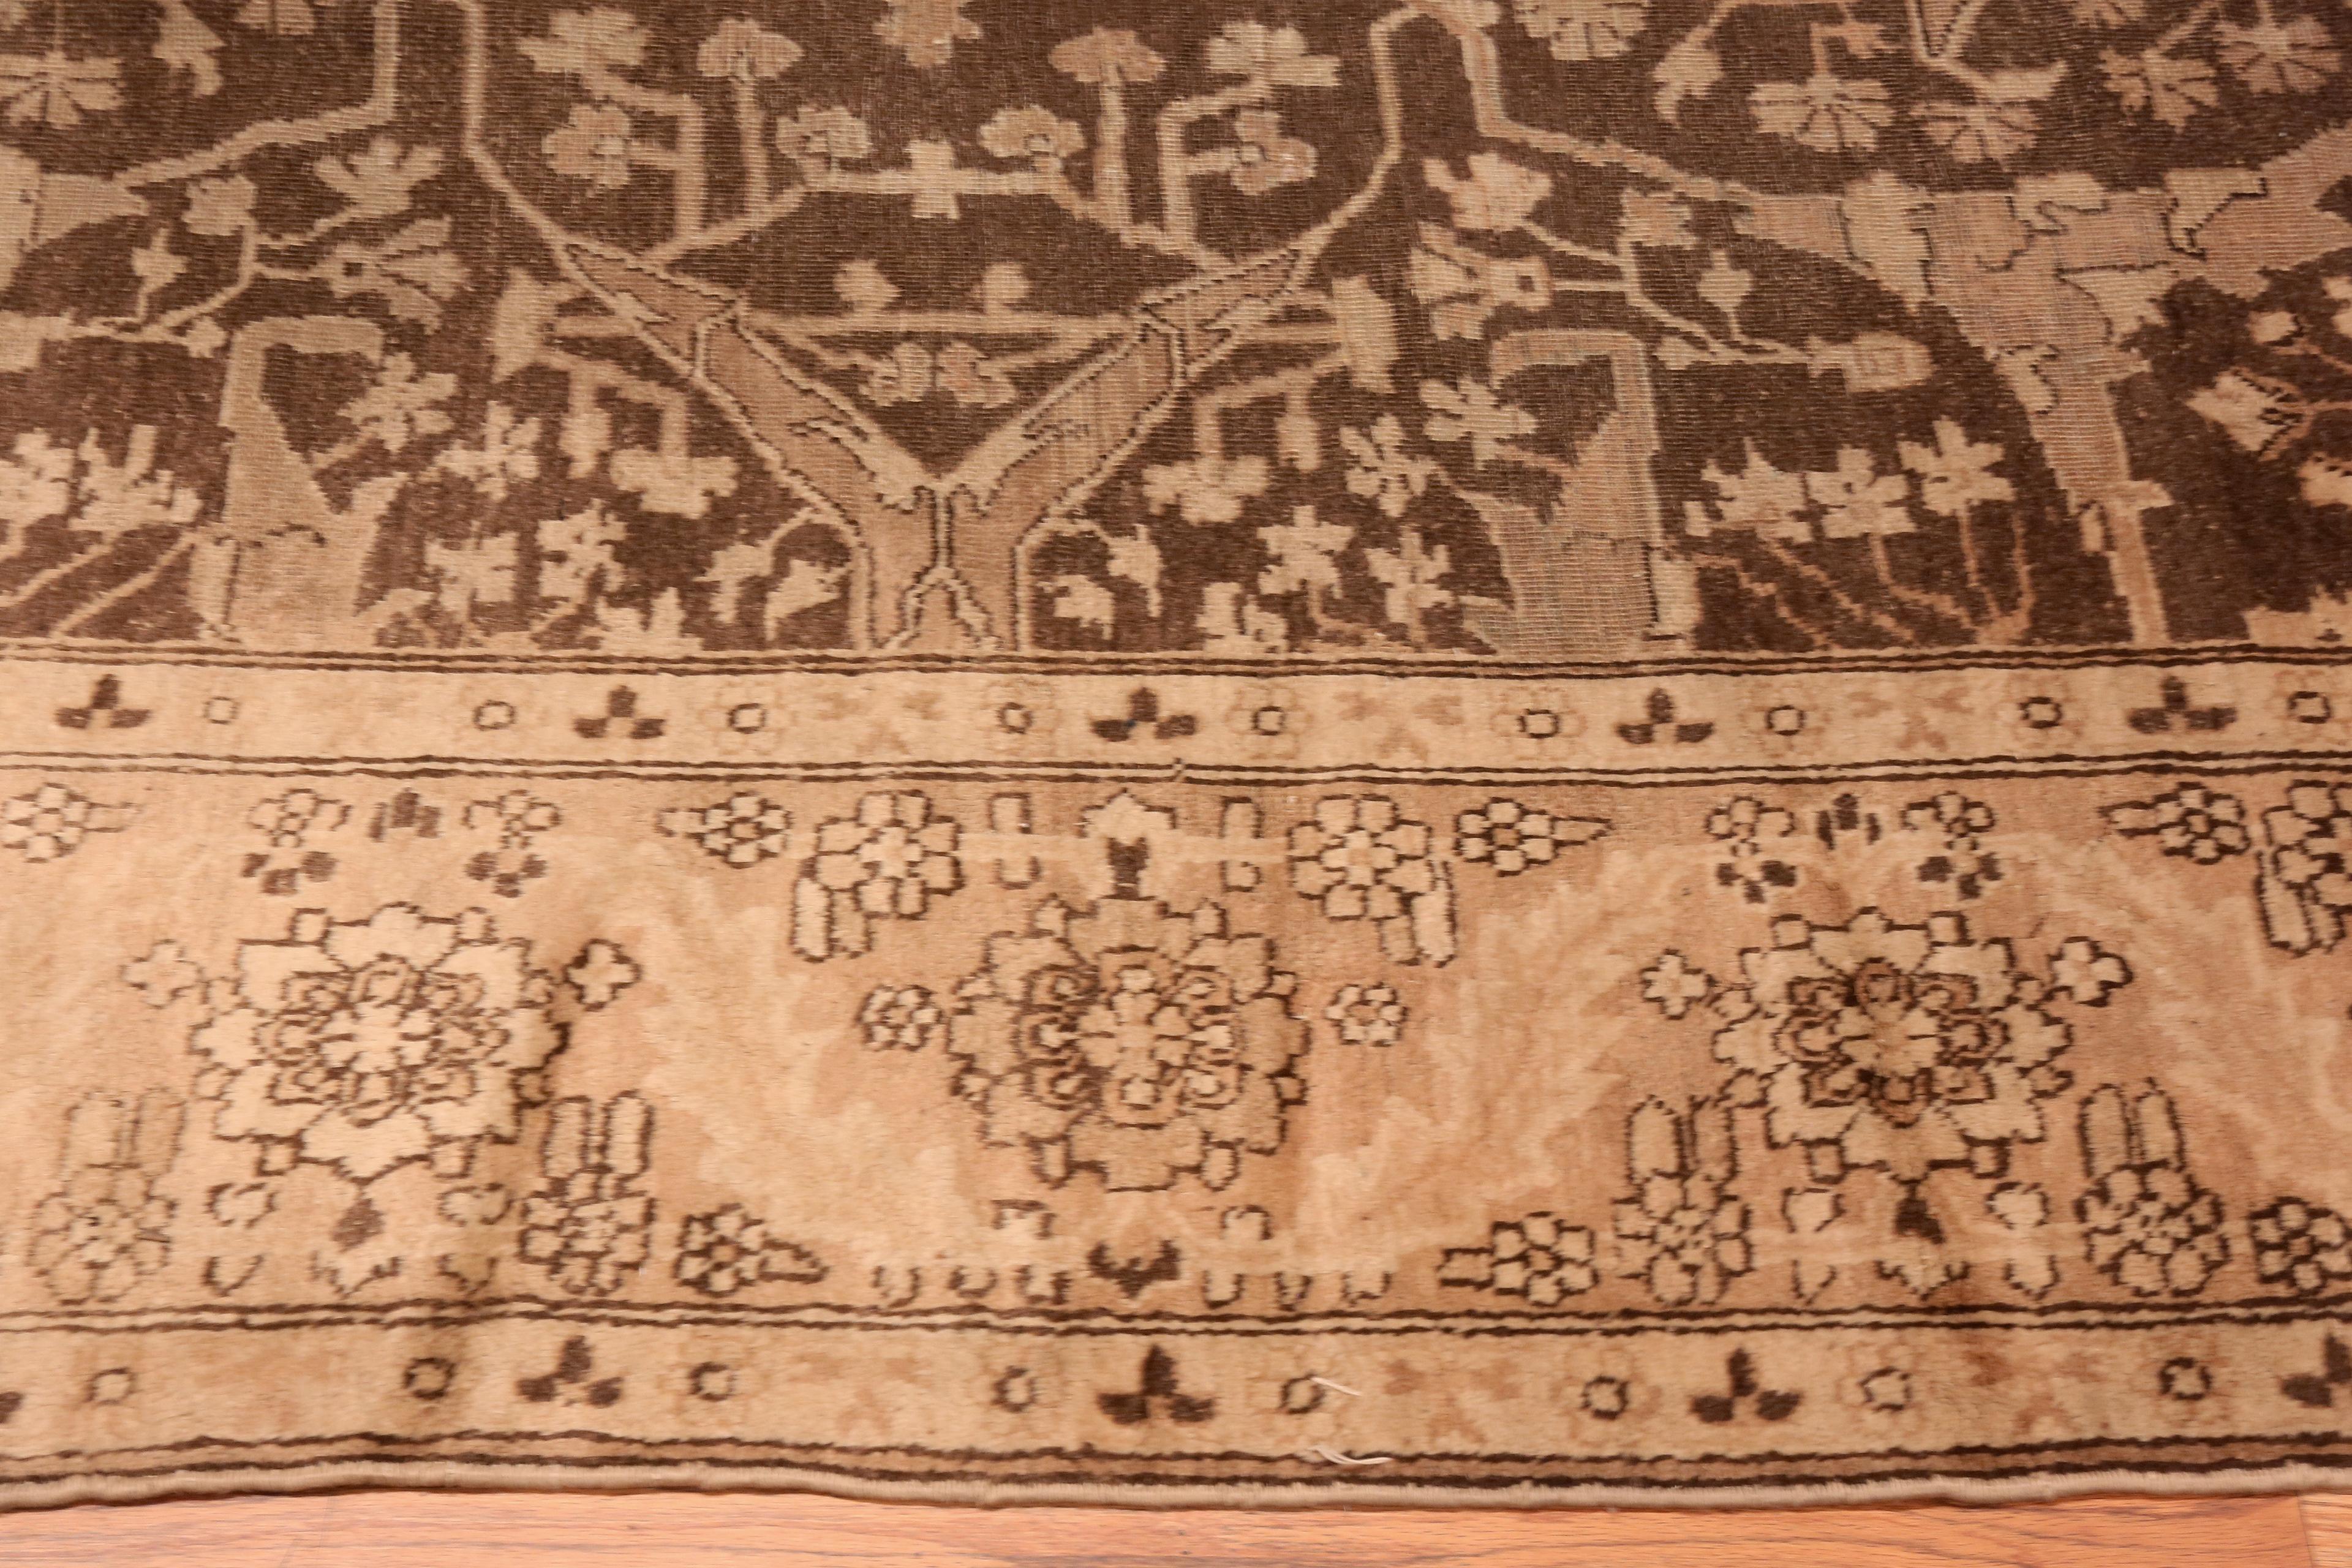 Beautiful Brown Antique Persian Sultanabad Area Rug, Country of Origin: Persia, Circa Date: 1900. Size: 12 ft x 14 ft 6 in (3.66 m x 4.42 m)

